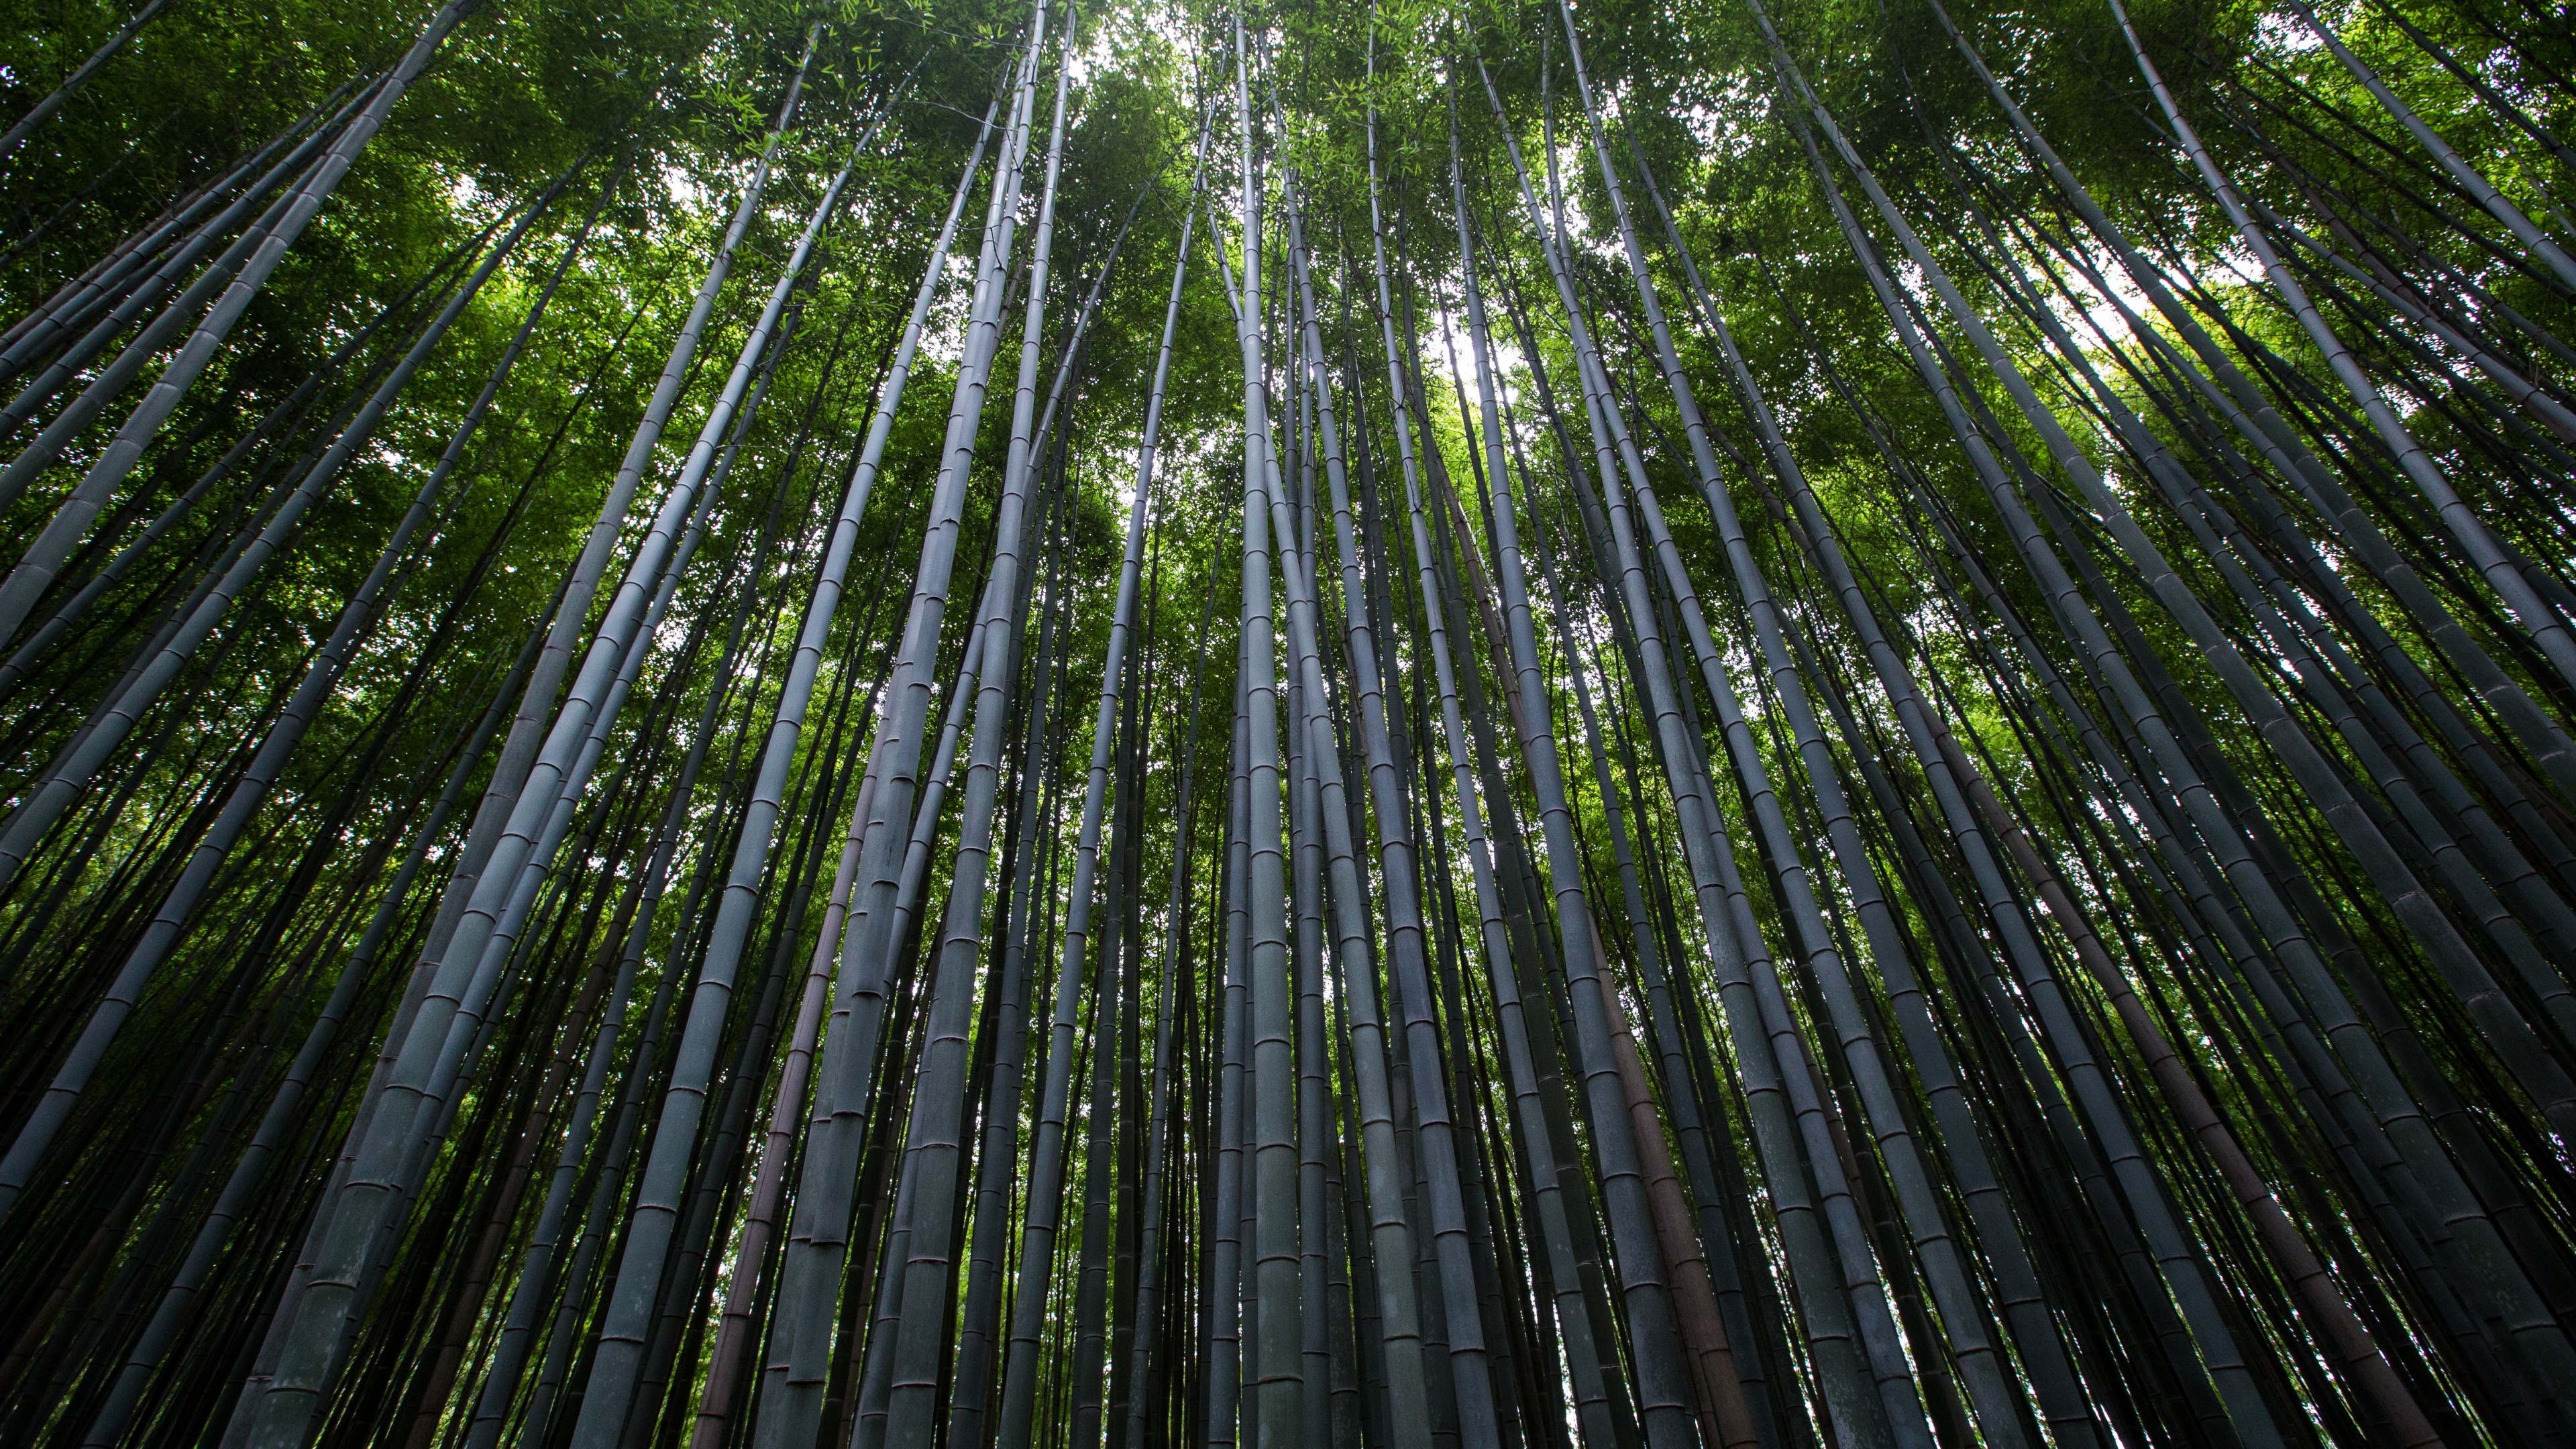 Bamboo: Everreen forest, Trees, Nature, The plant that is particularly common in the humid tropics. 3840x2160 4K Wallpaper.